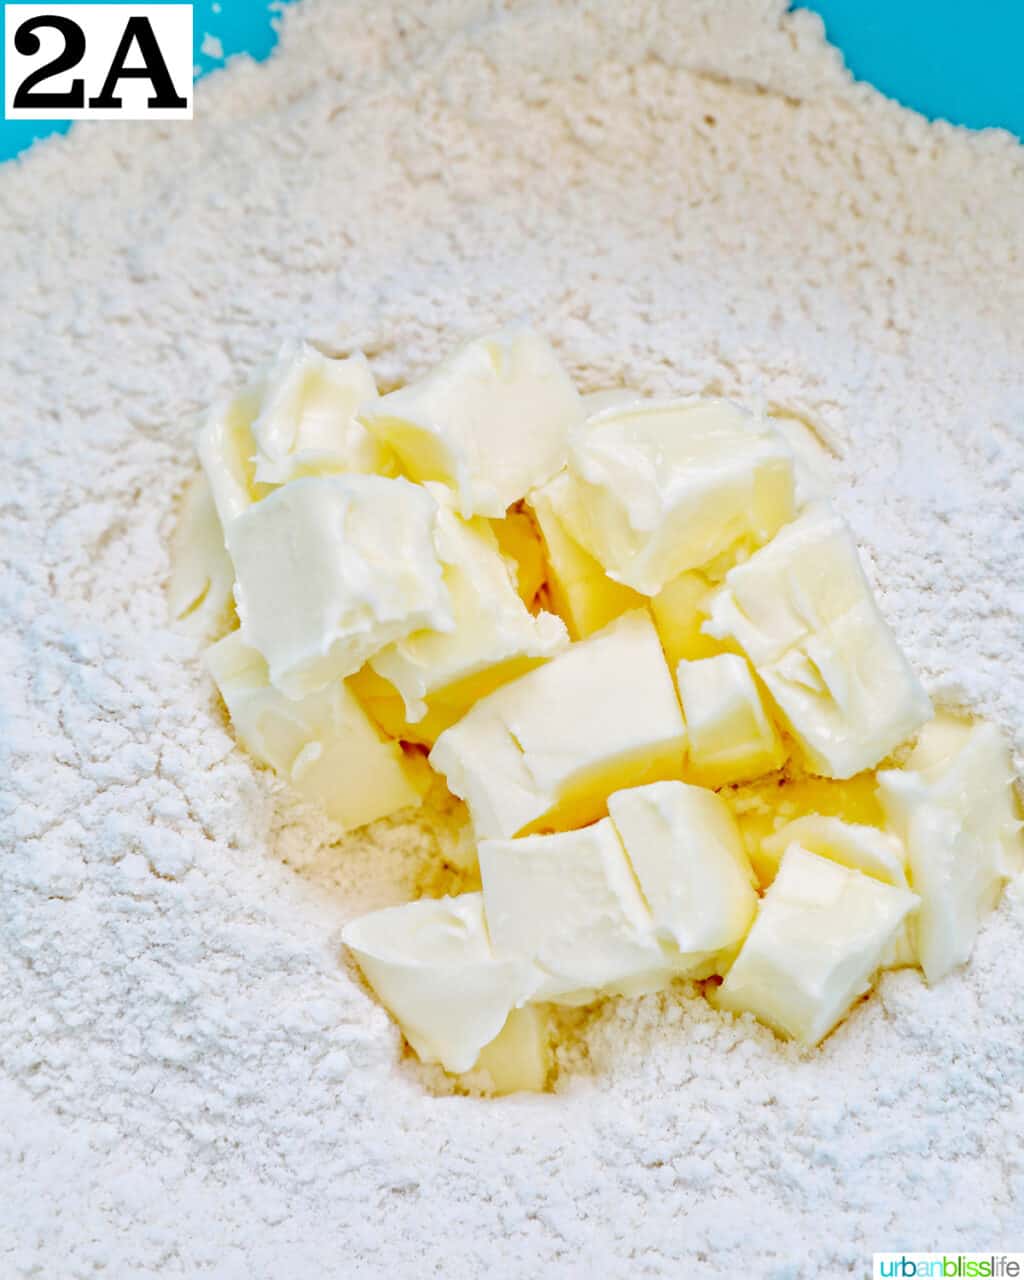 cubed butter in flour and other dry ingredients.